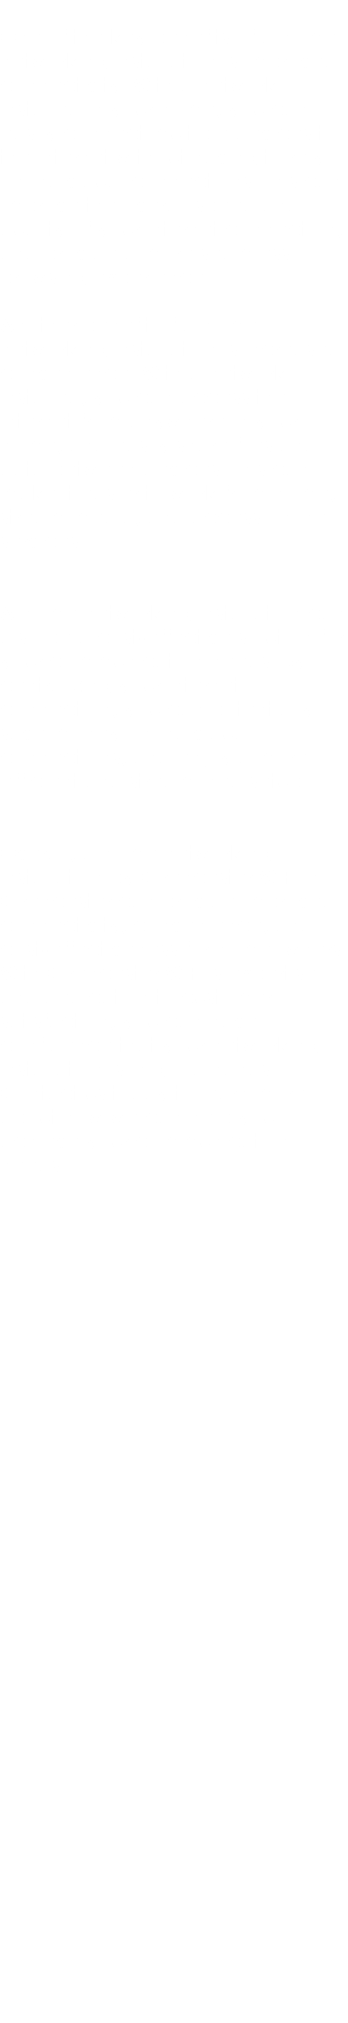  One of the key benefits of a home networking installation is improved connectivity. With a network installed in your home, you can easily connect multiple devices to the internet without having to rely on individual connections. This can improve the overall speed and quality of your internet connection, and provide a more seamless browsing experience. Another benefit of a home networking installation is increased convenience. With a network installed, you can access the internet from anywhere in your home, and easily share files and data between devices. This can make it easier to work from home, stream media, and access online services. A home networking installation can also be a cost-effective solution for your communication needs. By centralizing your internet connection, you can potentially save money on individual connections, and enjoy a more efficient and streamlined setup. Overall, a home networking installation by Cirencester WiFi in Cirencester can provide improved connectivity, convenience, and cost-effectiveness for homeowners. With Cirencester WiFi 's expertise and dedication to customer satisfaction, you can have confidence that your networking installation is in good hands. Contact us today to learn more about how we can help you achieve your communication needs.